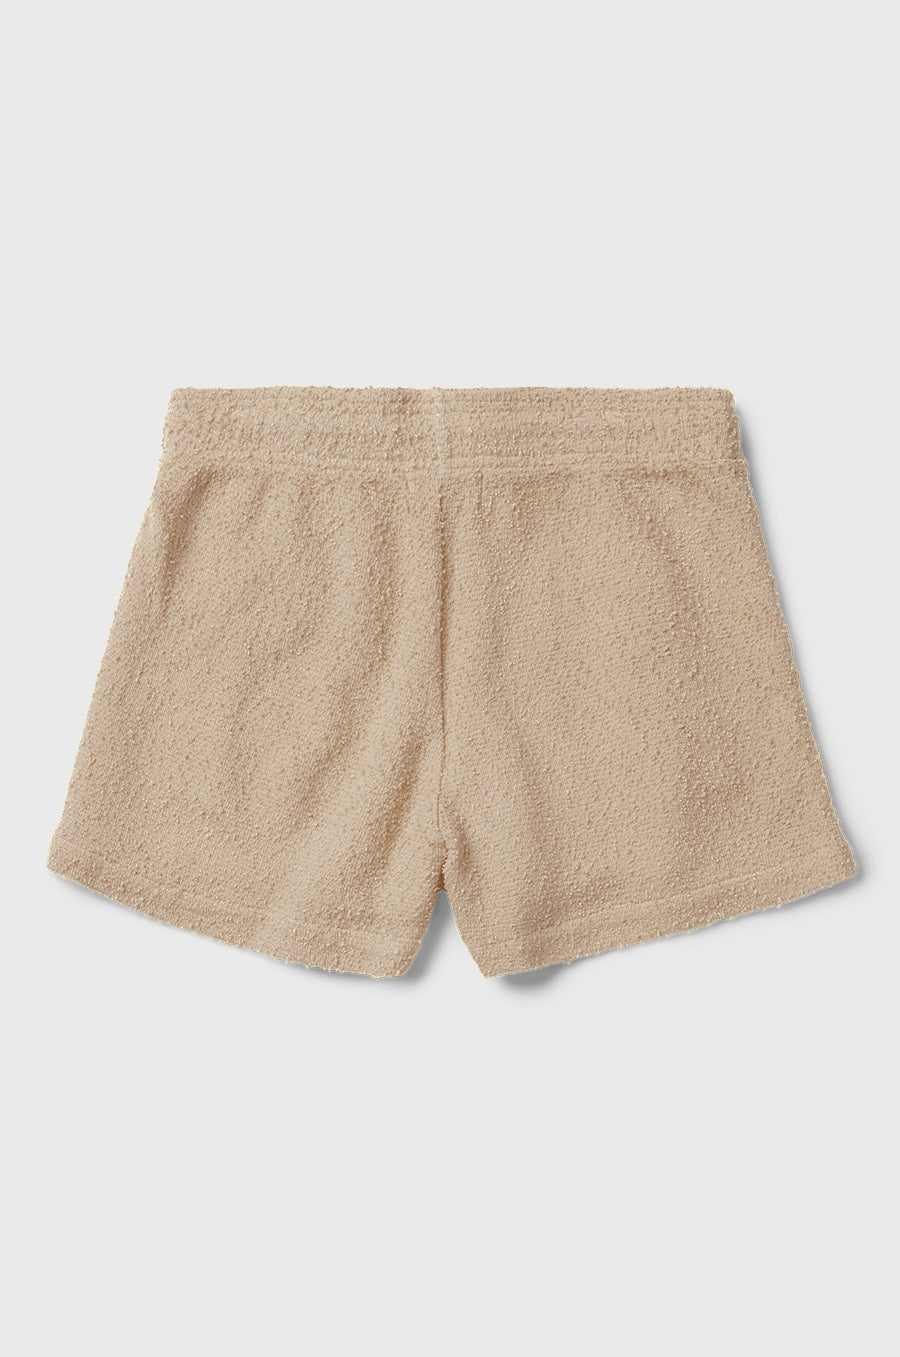 the lady & the sailor Weekend Short in Stone Boucle.